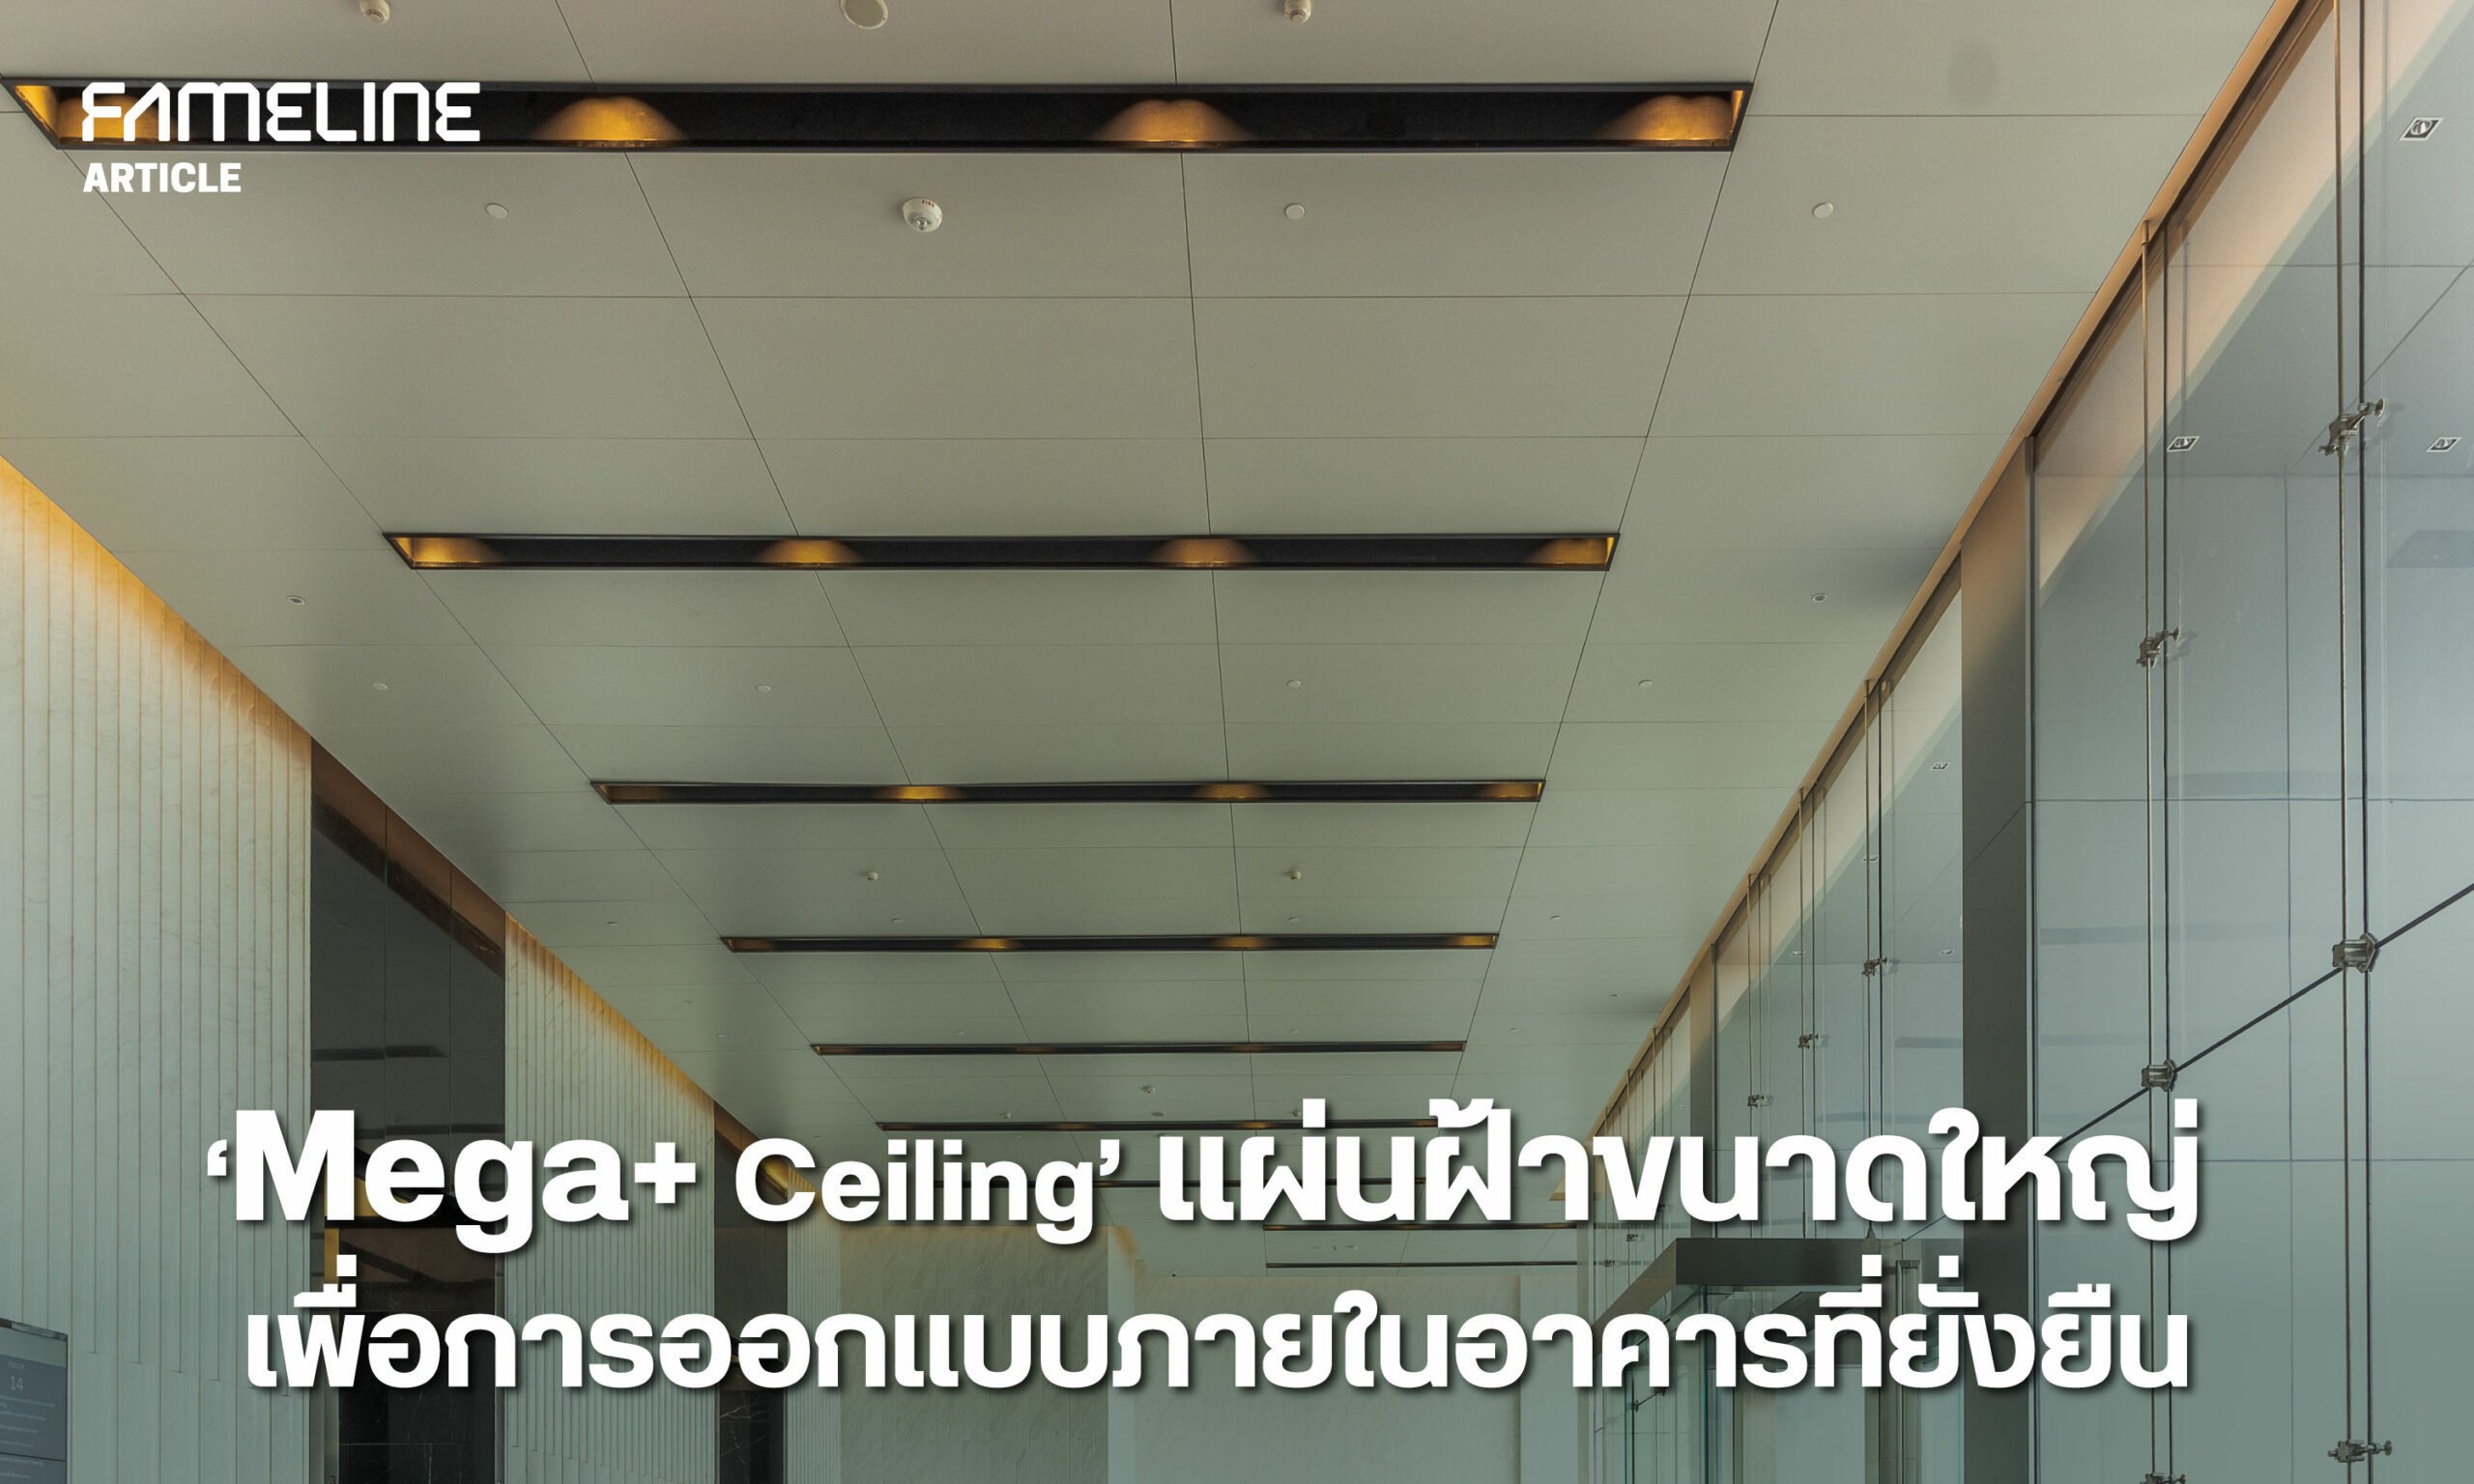 The image displays an interior scene featuring the 'Mega+ Ceiling' design, likely a product or project by FAMELINE. The ceiling exhibits clean lines with recessed lighting that casts a warm glow, complementing the cool tones of the ceiling panels. The modern design is further enhanced by the sleek glass wall on one side, adding depth and openness to the space. This setting is a fine example of how thoughtful interior design, using products like the 'Mega+ Ceiling,' can create an ambience that is both functional and aesthetically pleasing, contributing to the building's overall energy efficiency and architectural elegance.